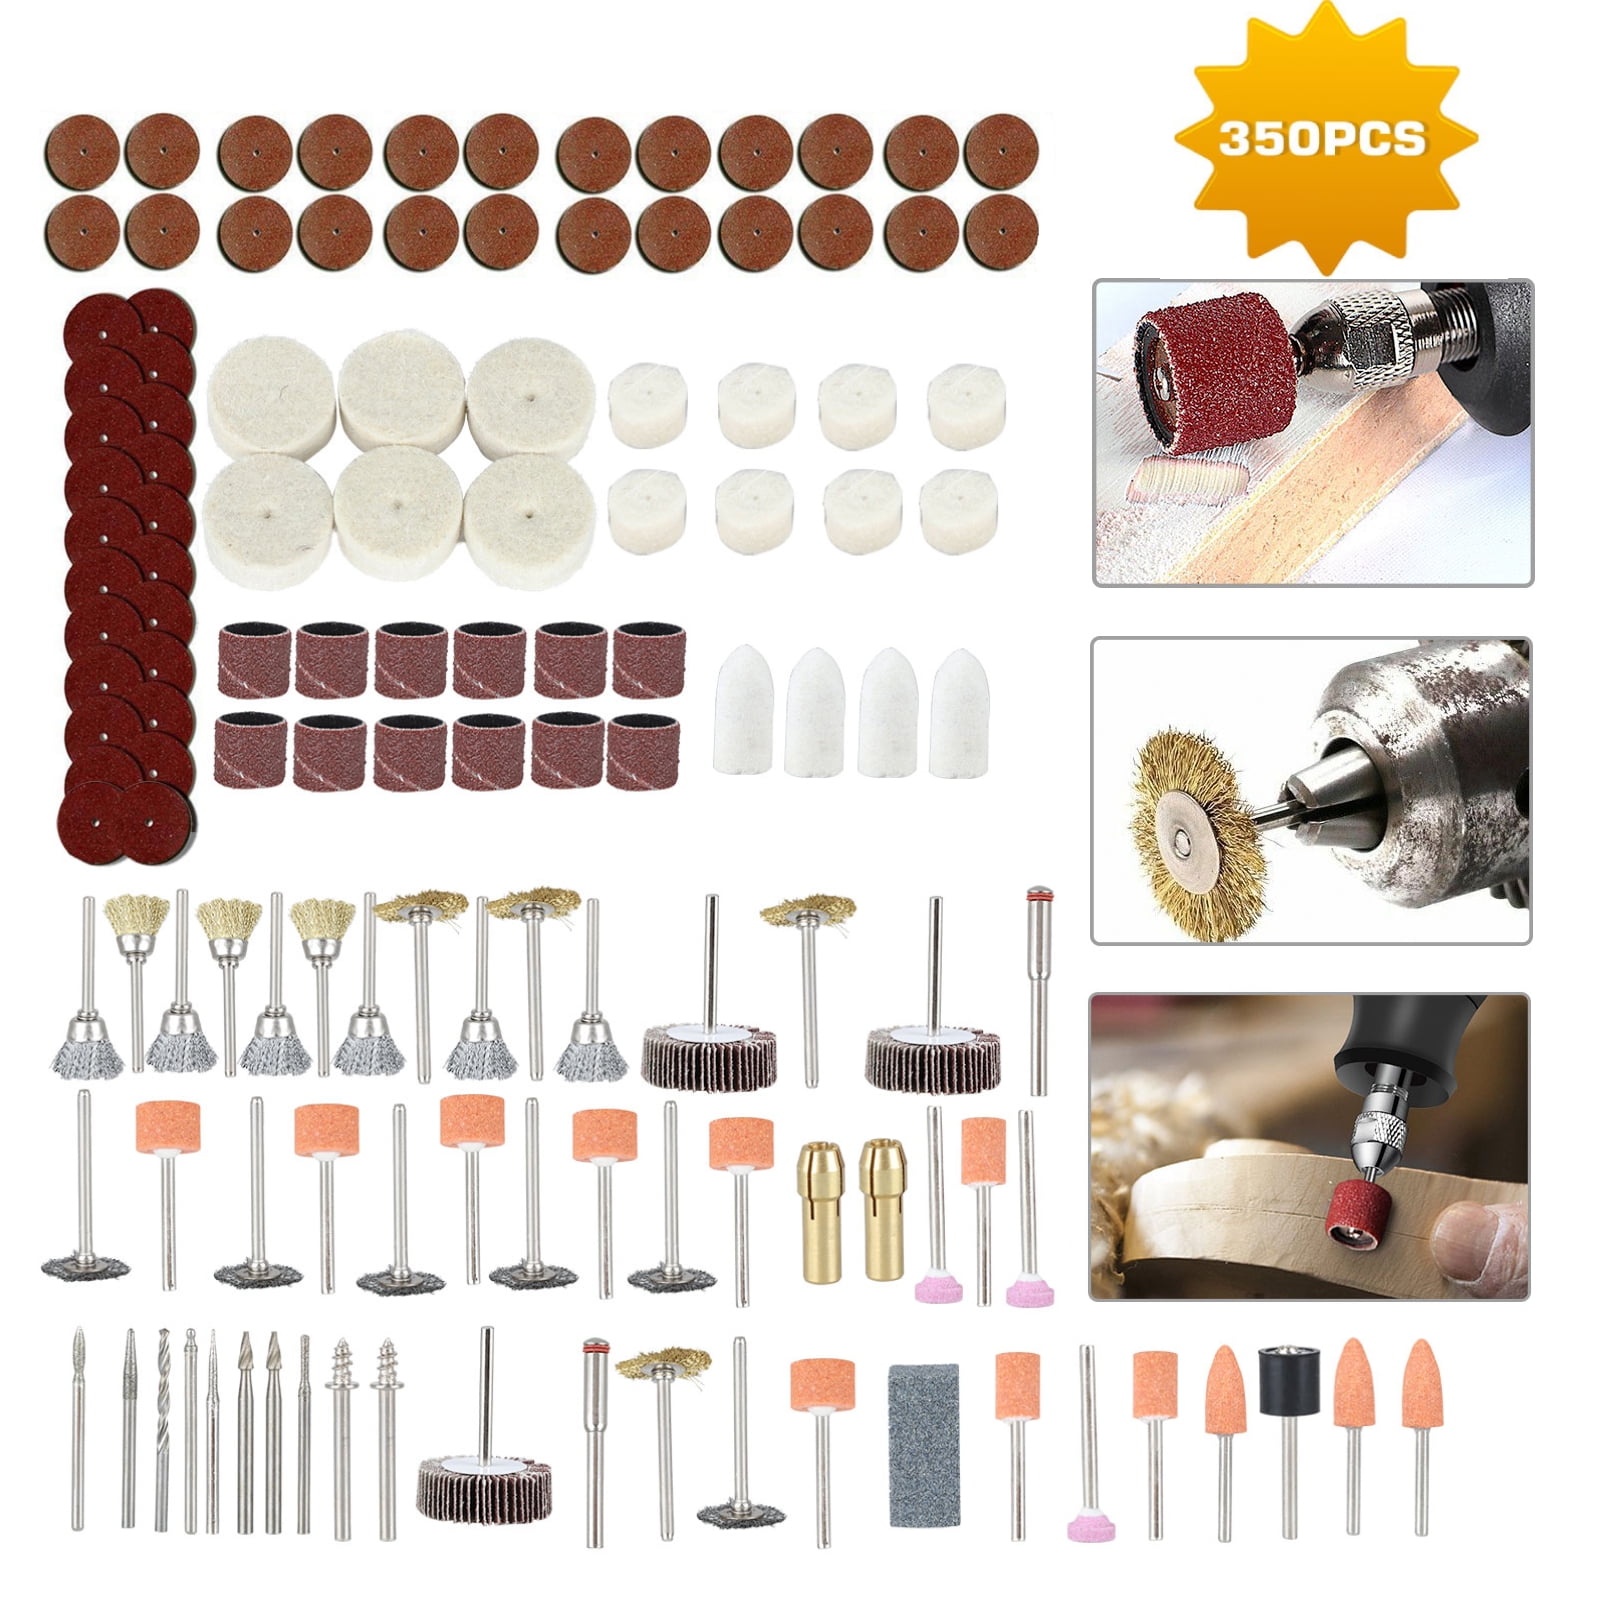 Rotary Drill Tool Accessories Set For Dremel Grinding Sanding Polishing Tool HOT 